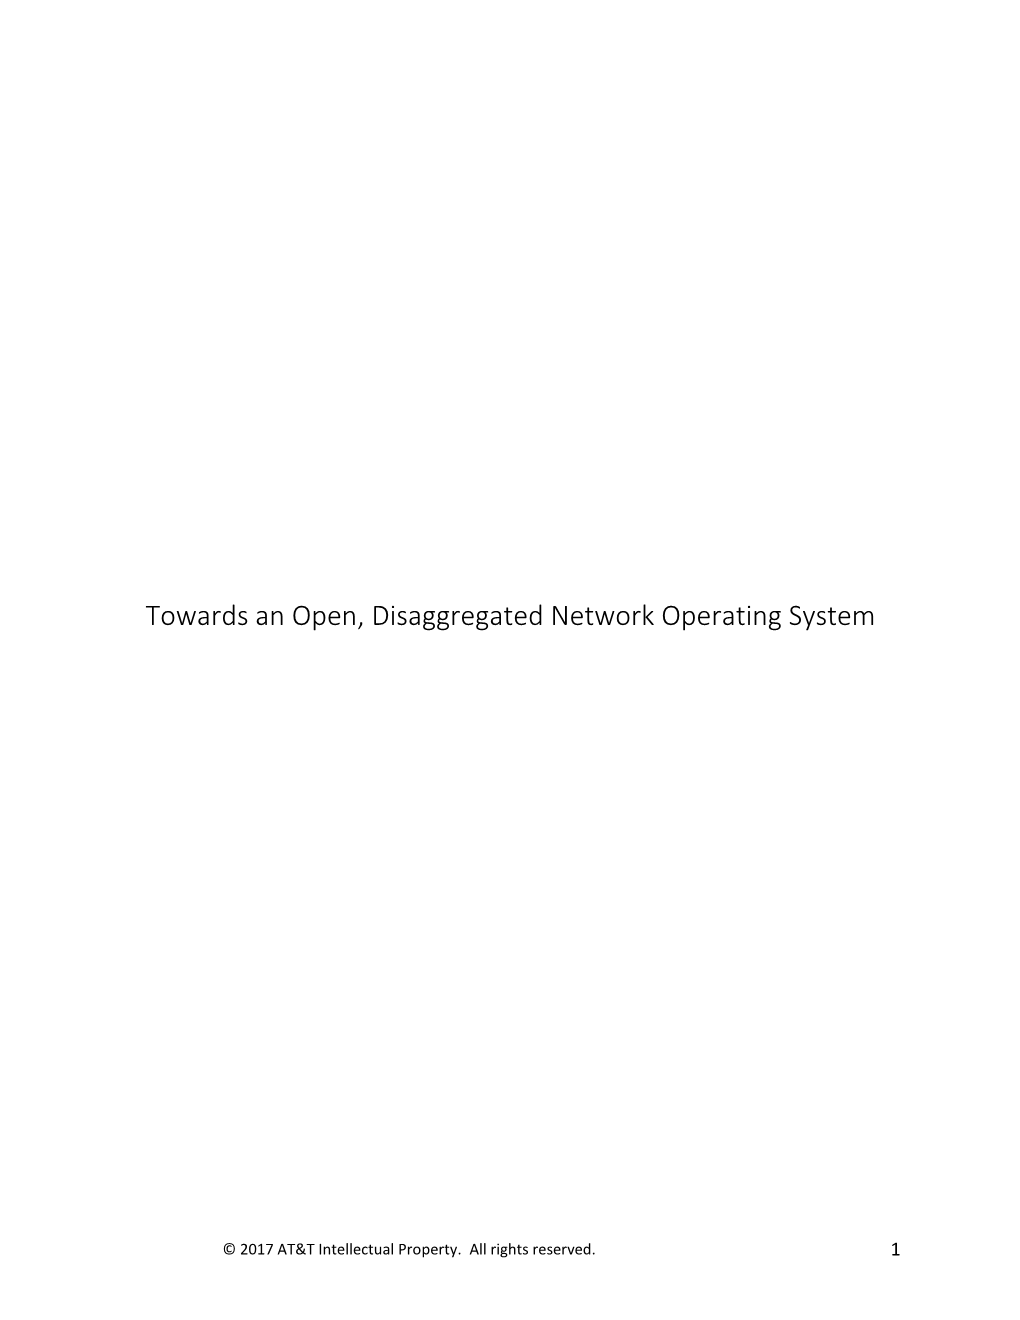 Towards an Open, Disaggregated Network Operating System